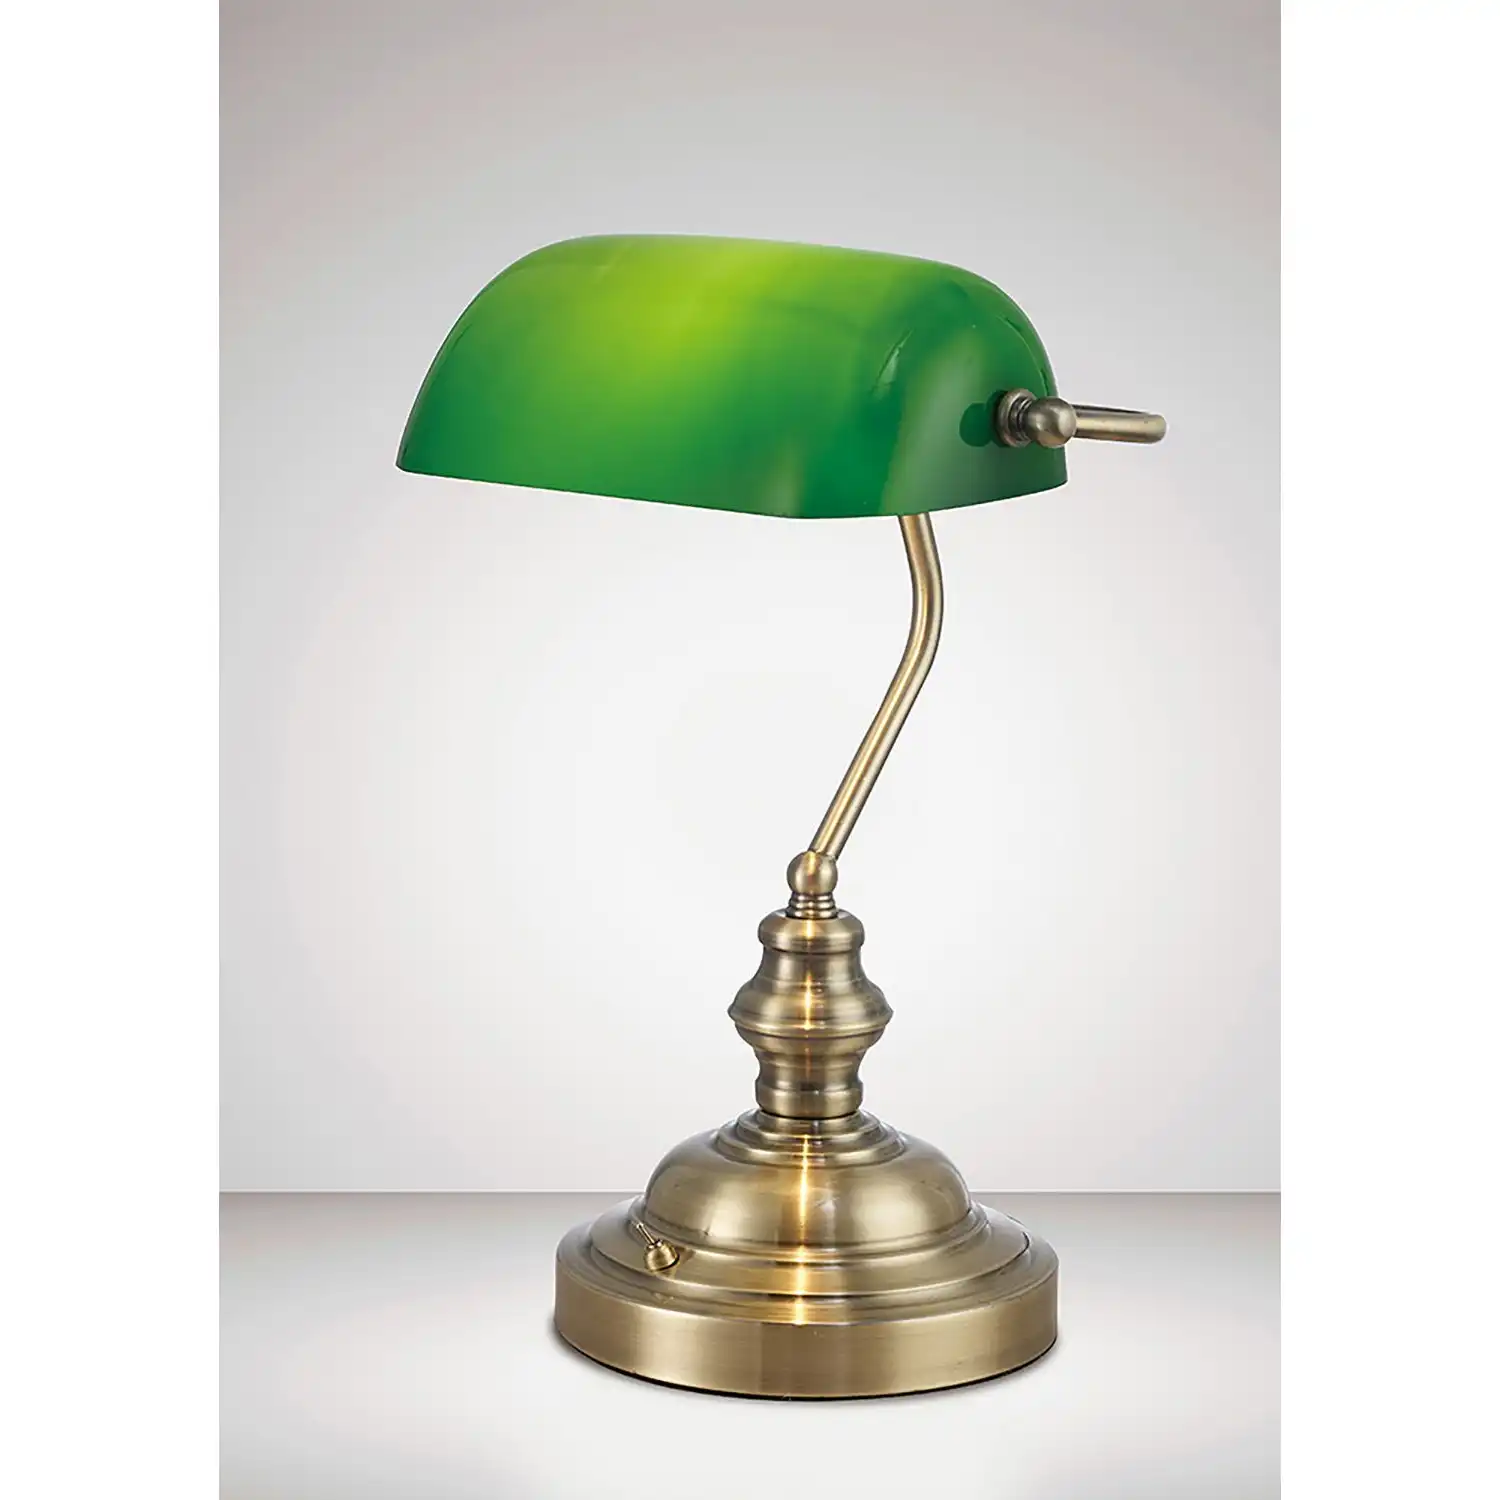 Morgan Bankers Table Lamp 1 Light E27 Antique Brass Green Glass